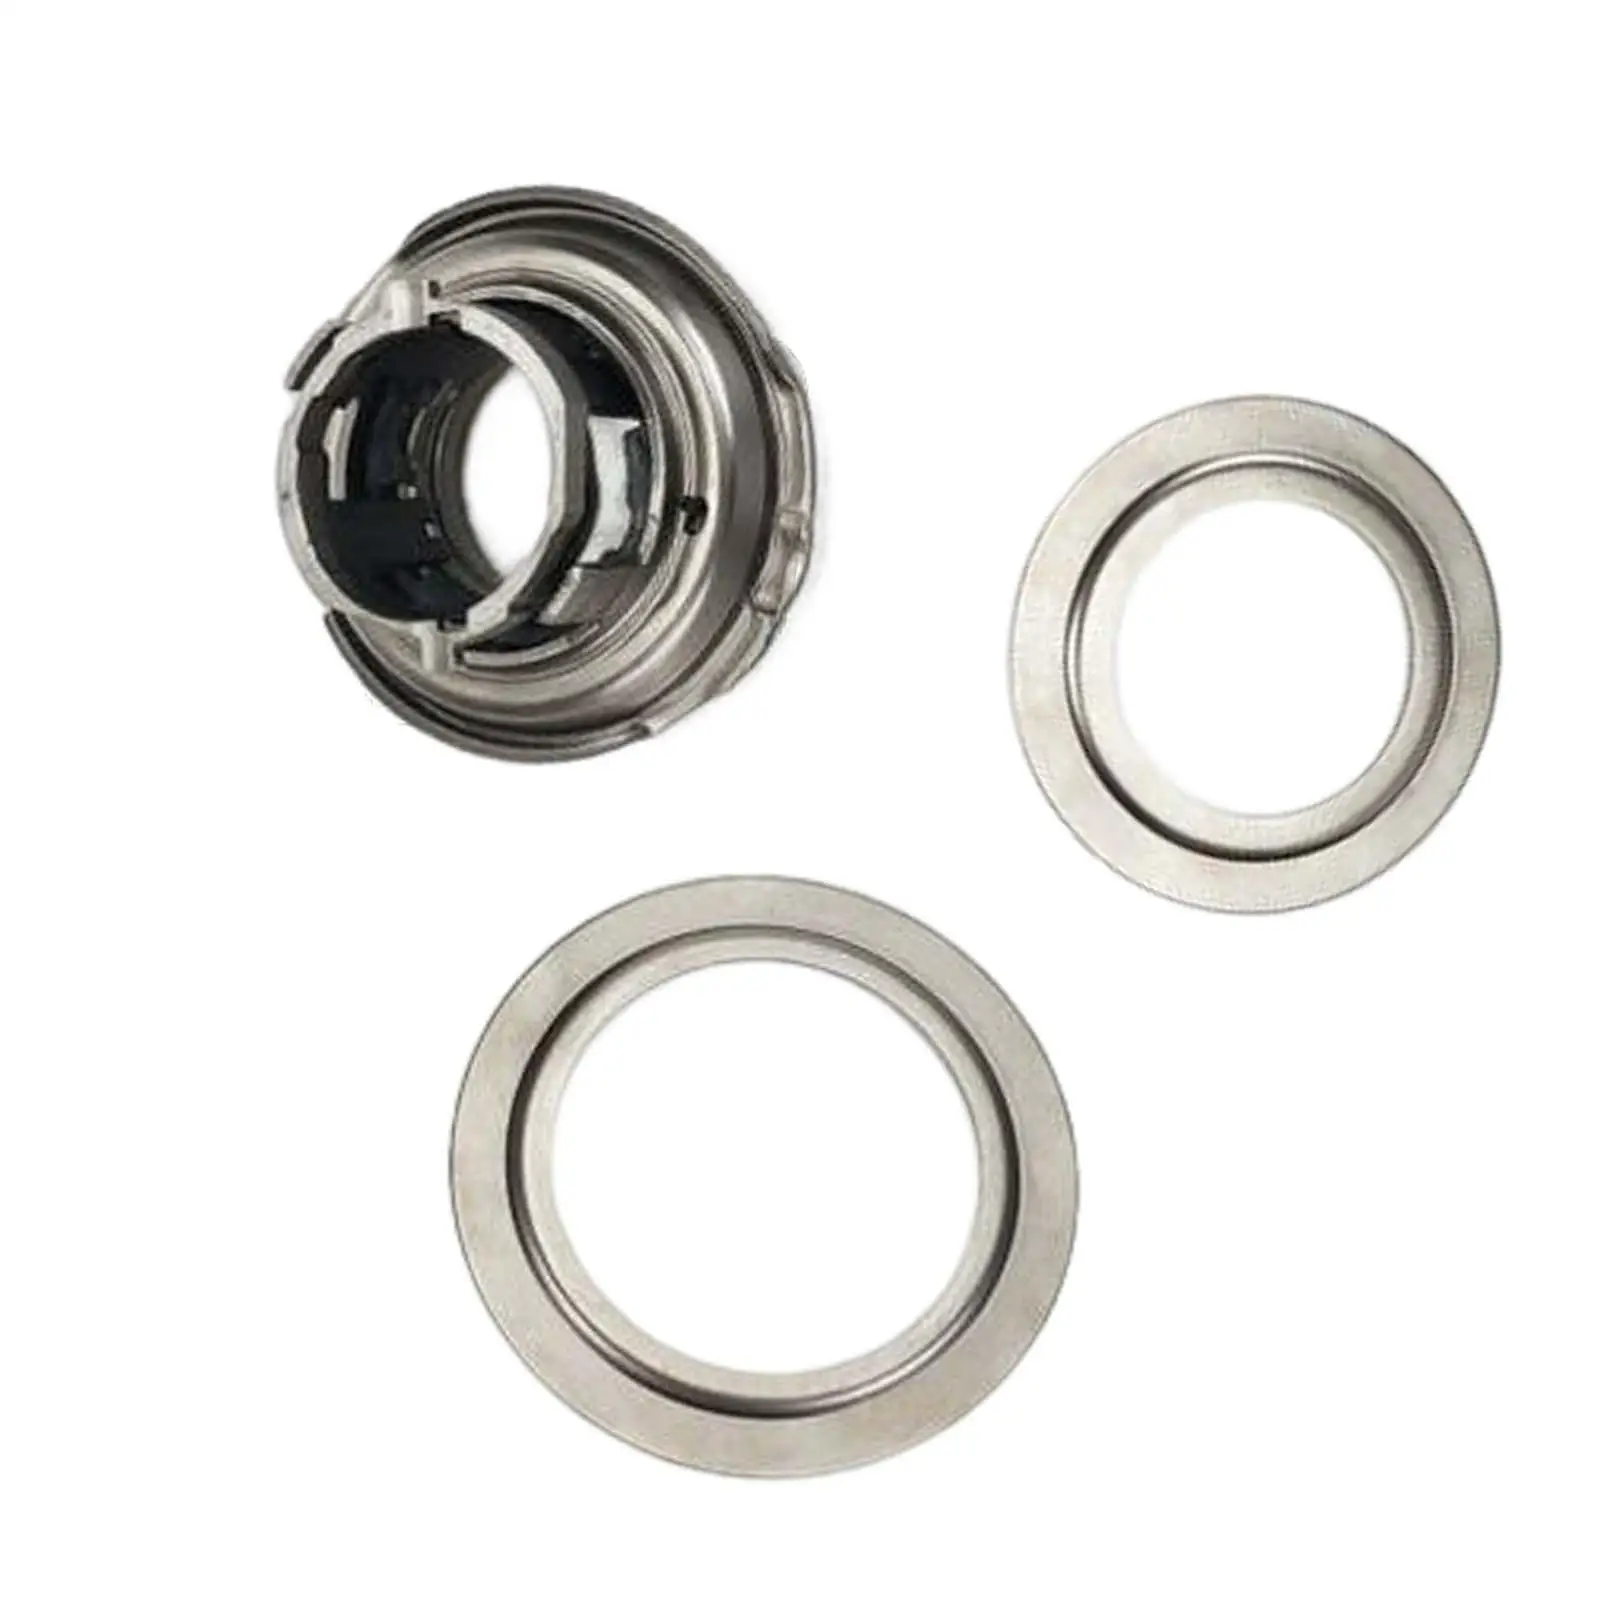 Transmission Bearing Kit 6Dct250 Dps6 Replacement Fit for   Fiesta